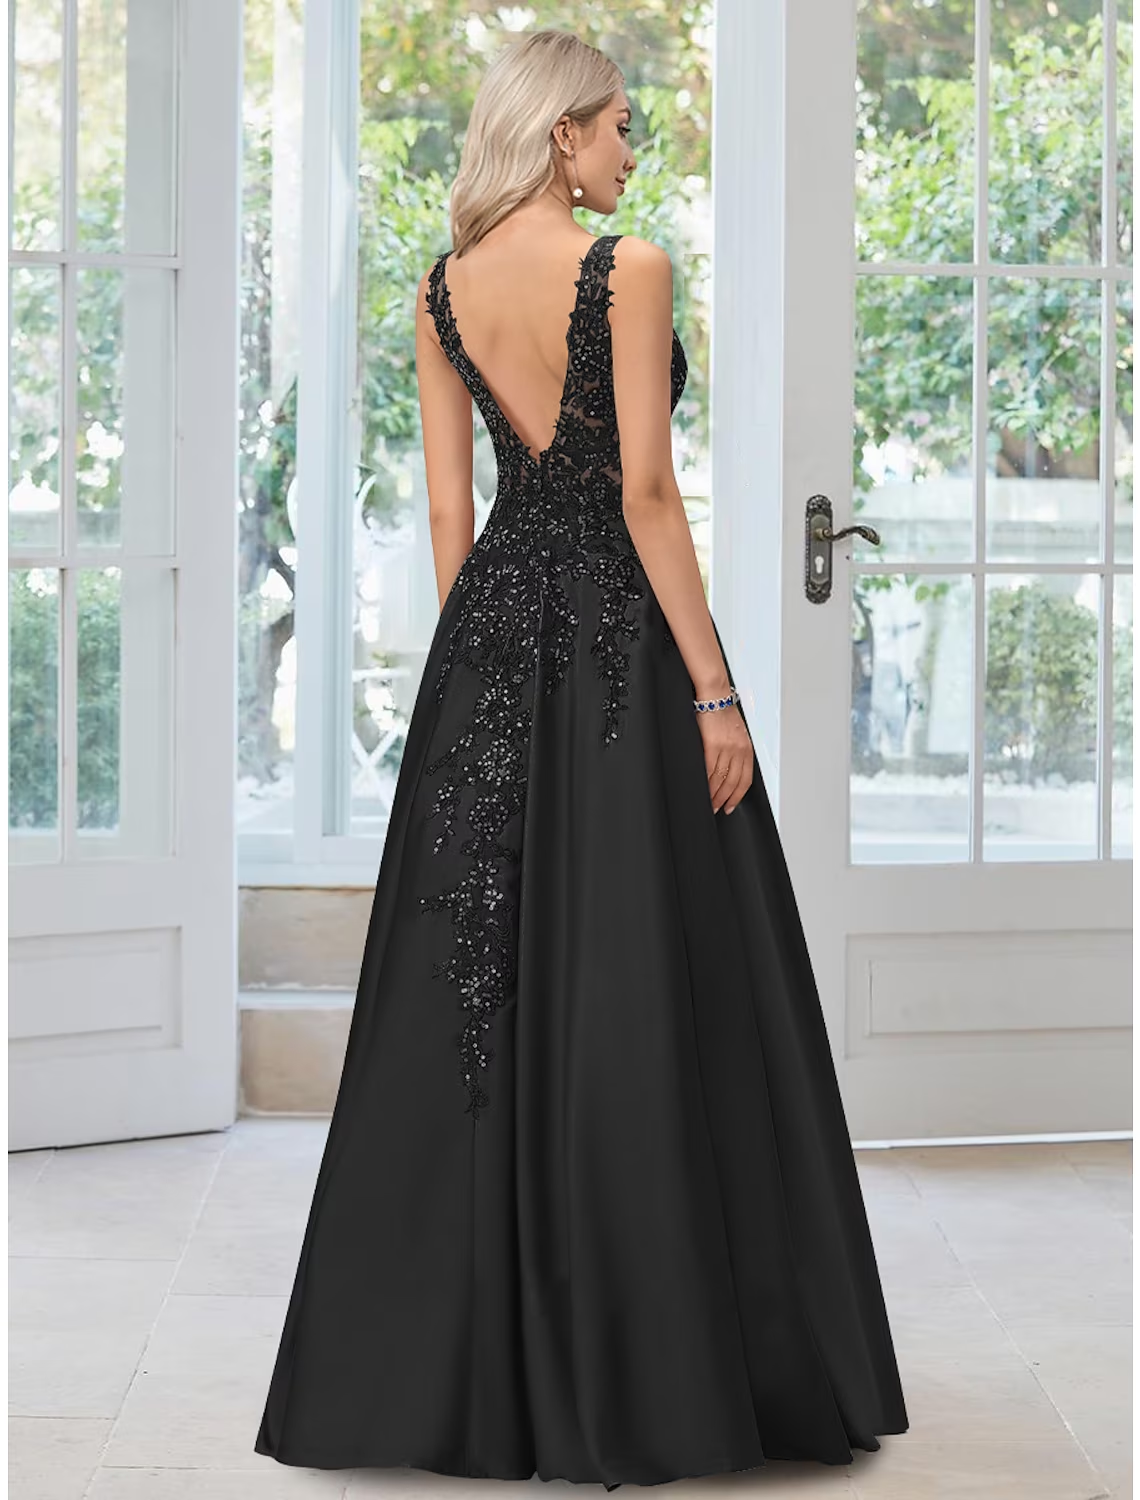 A-Line Evening Gown Black Dress Formal Floor Length Sleeveless V Neck Lace with Appliques